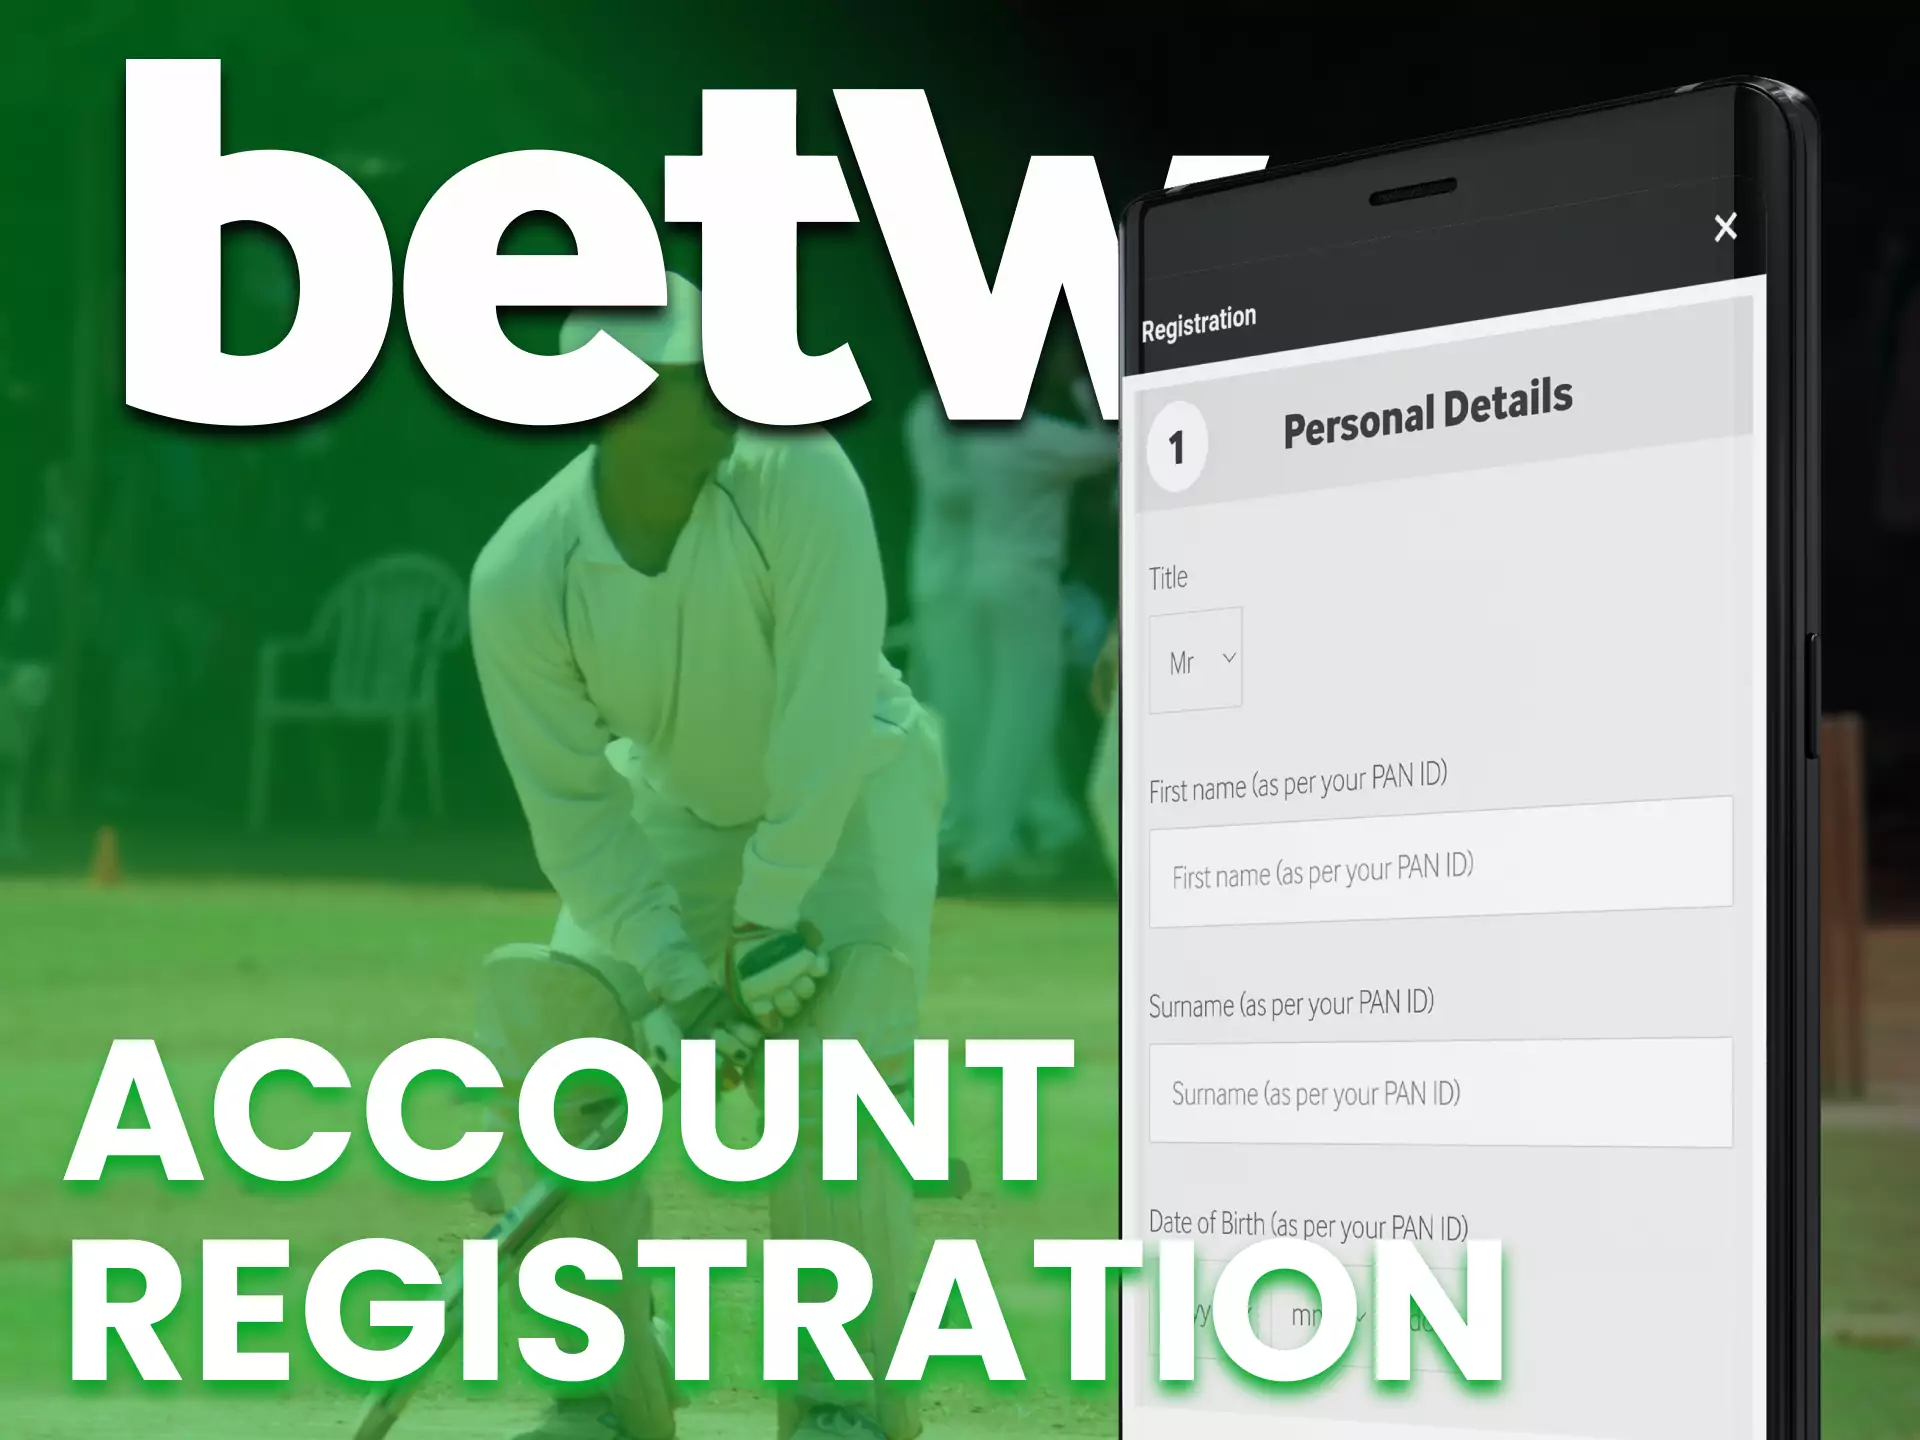 Complete a simple registration on the Betway app to play and bet.